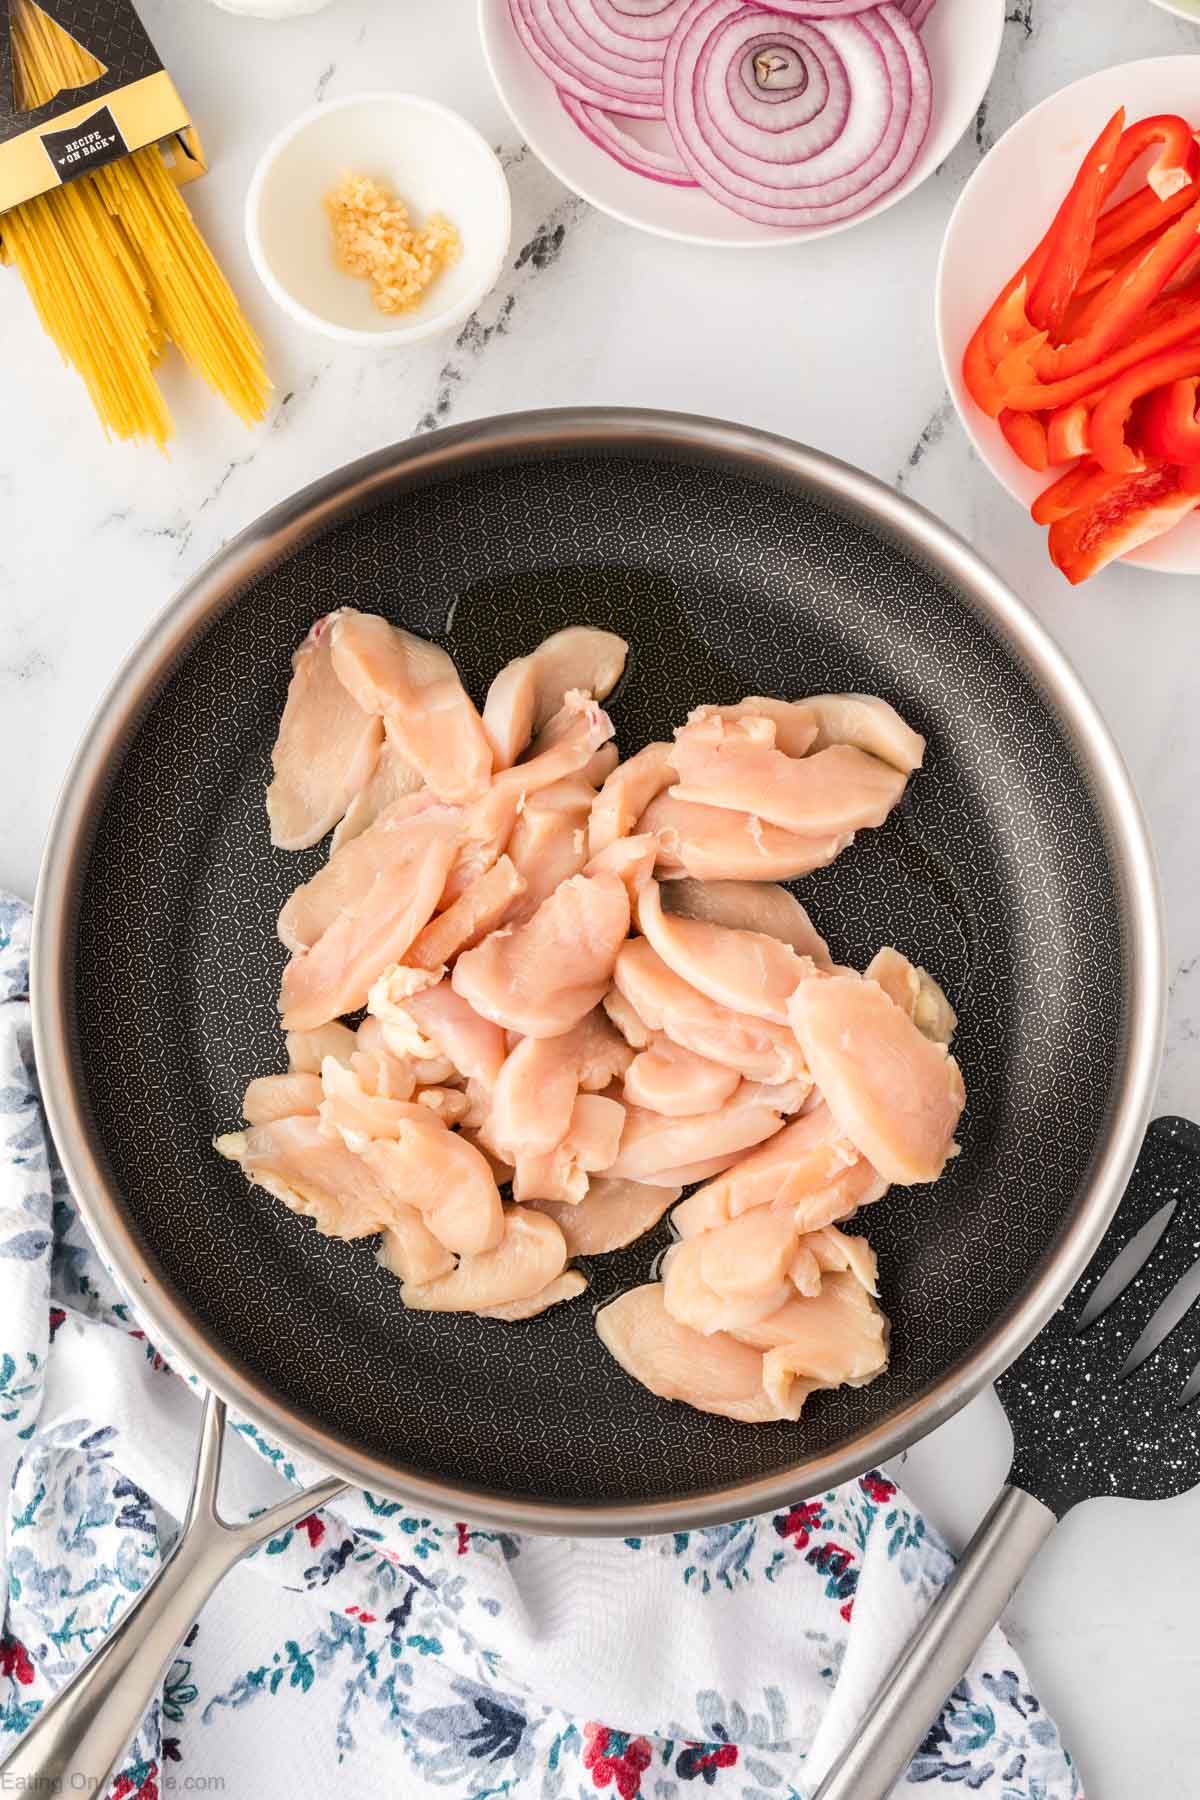 Placing chicken in a skillet to cook